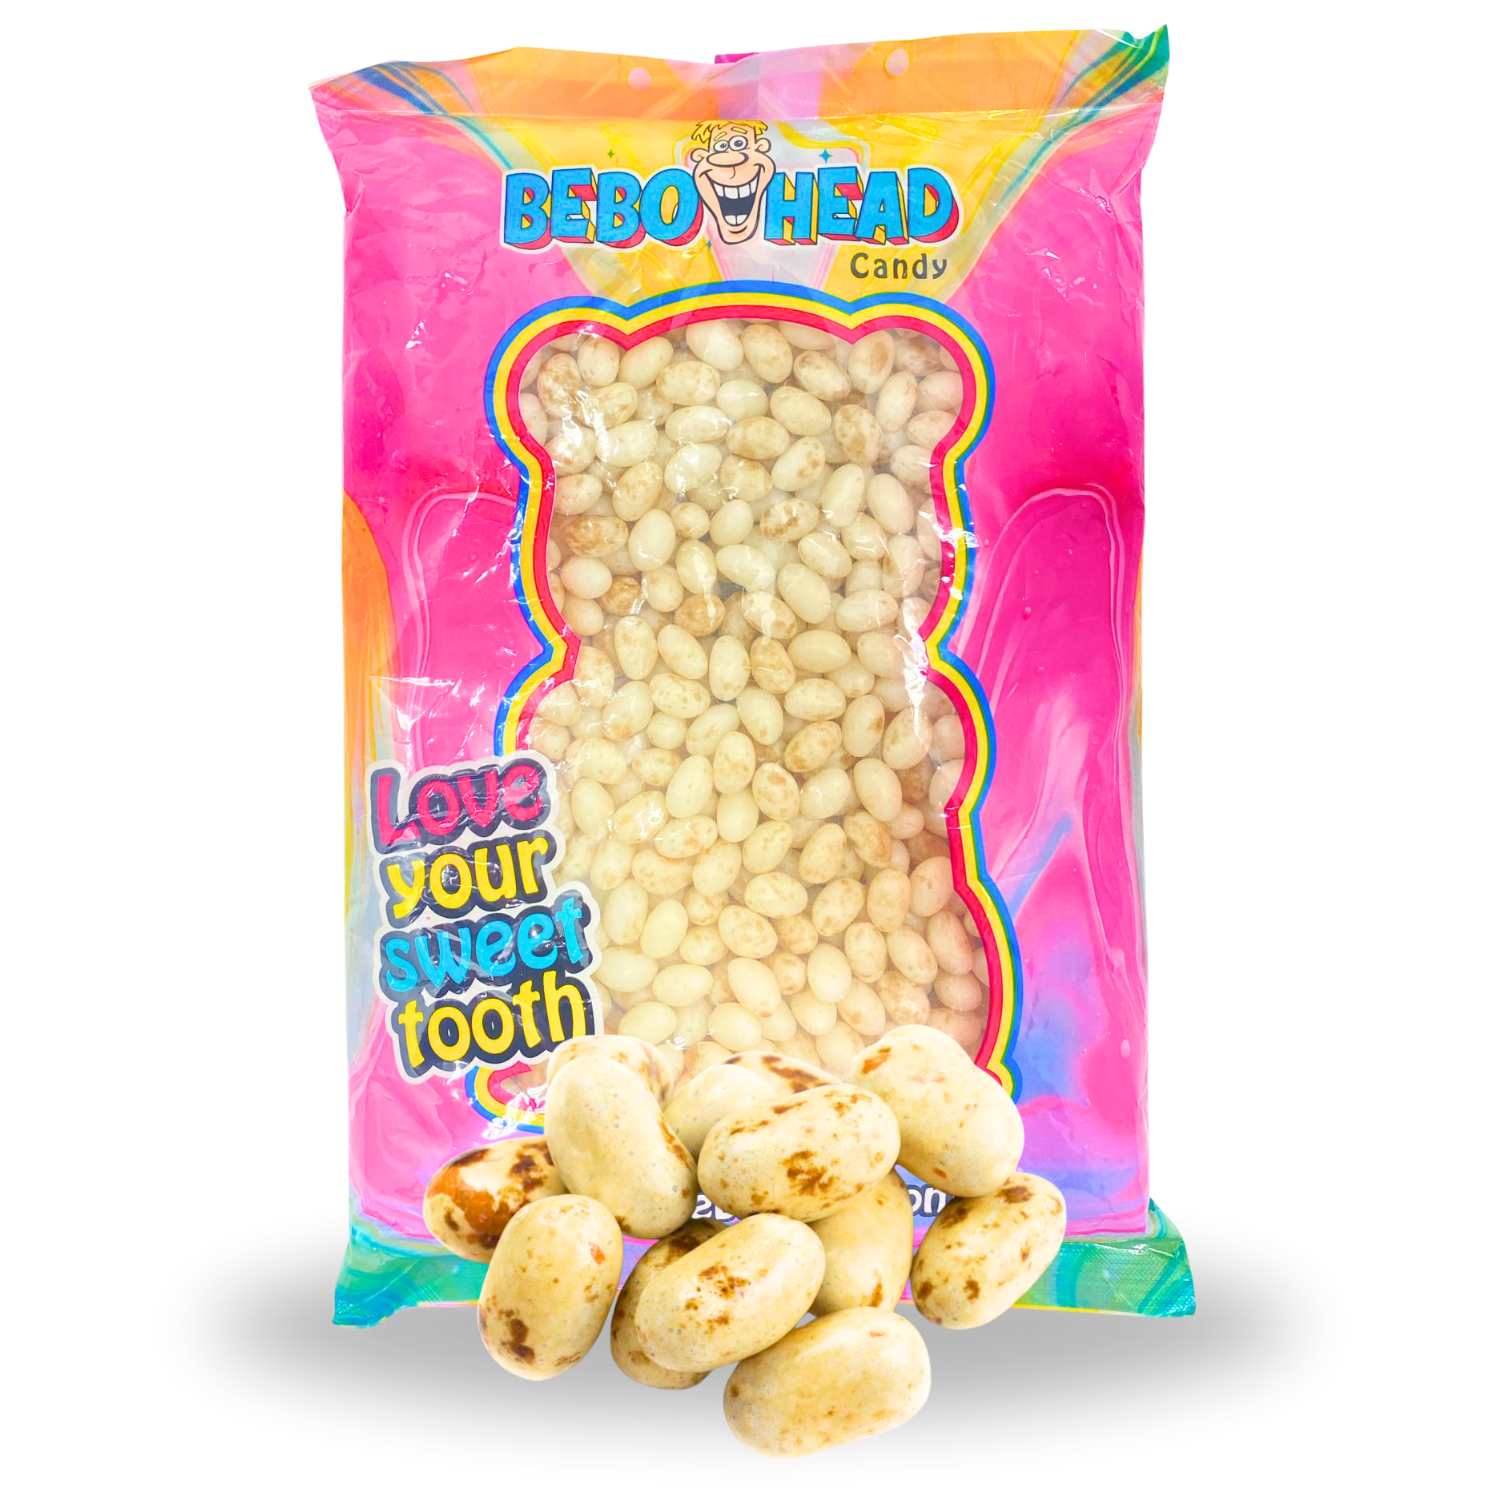 French Vanilla Jelly Beans - 2.2 Pounds